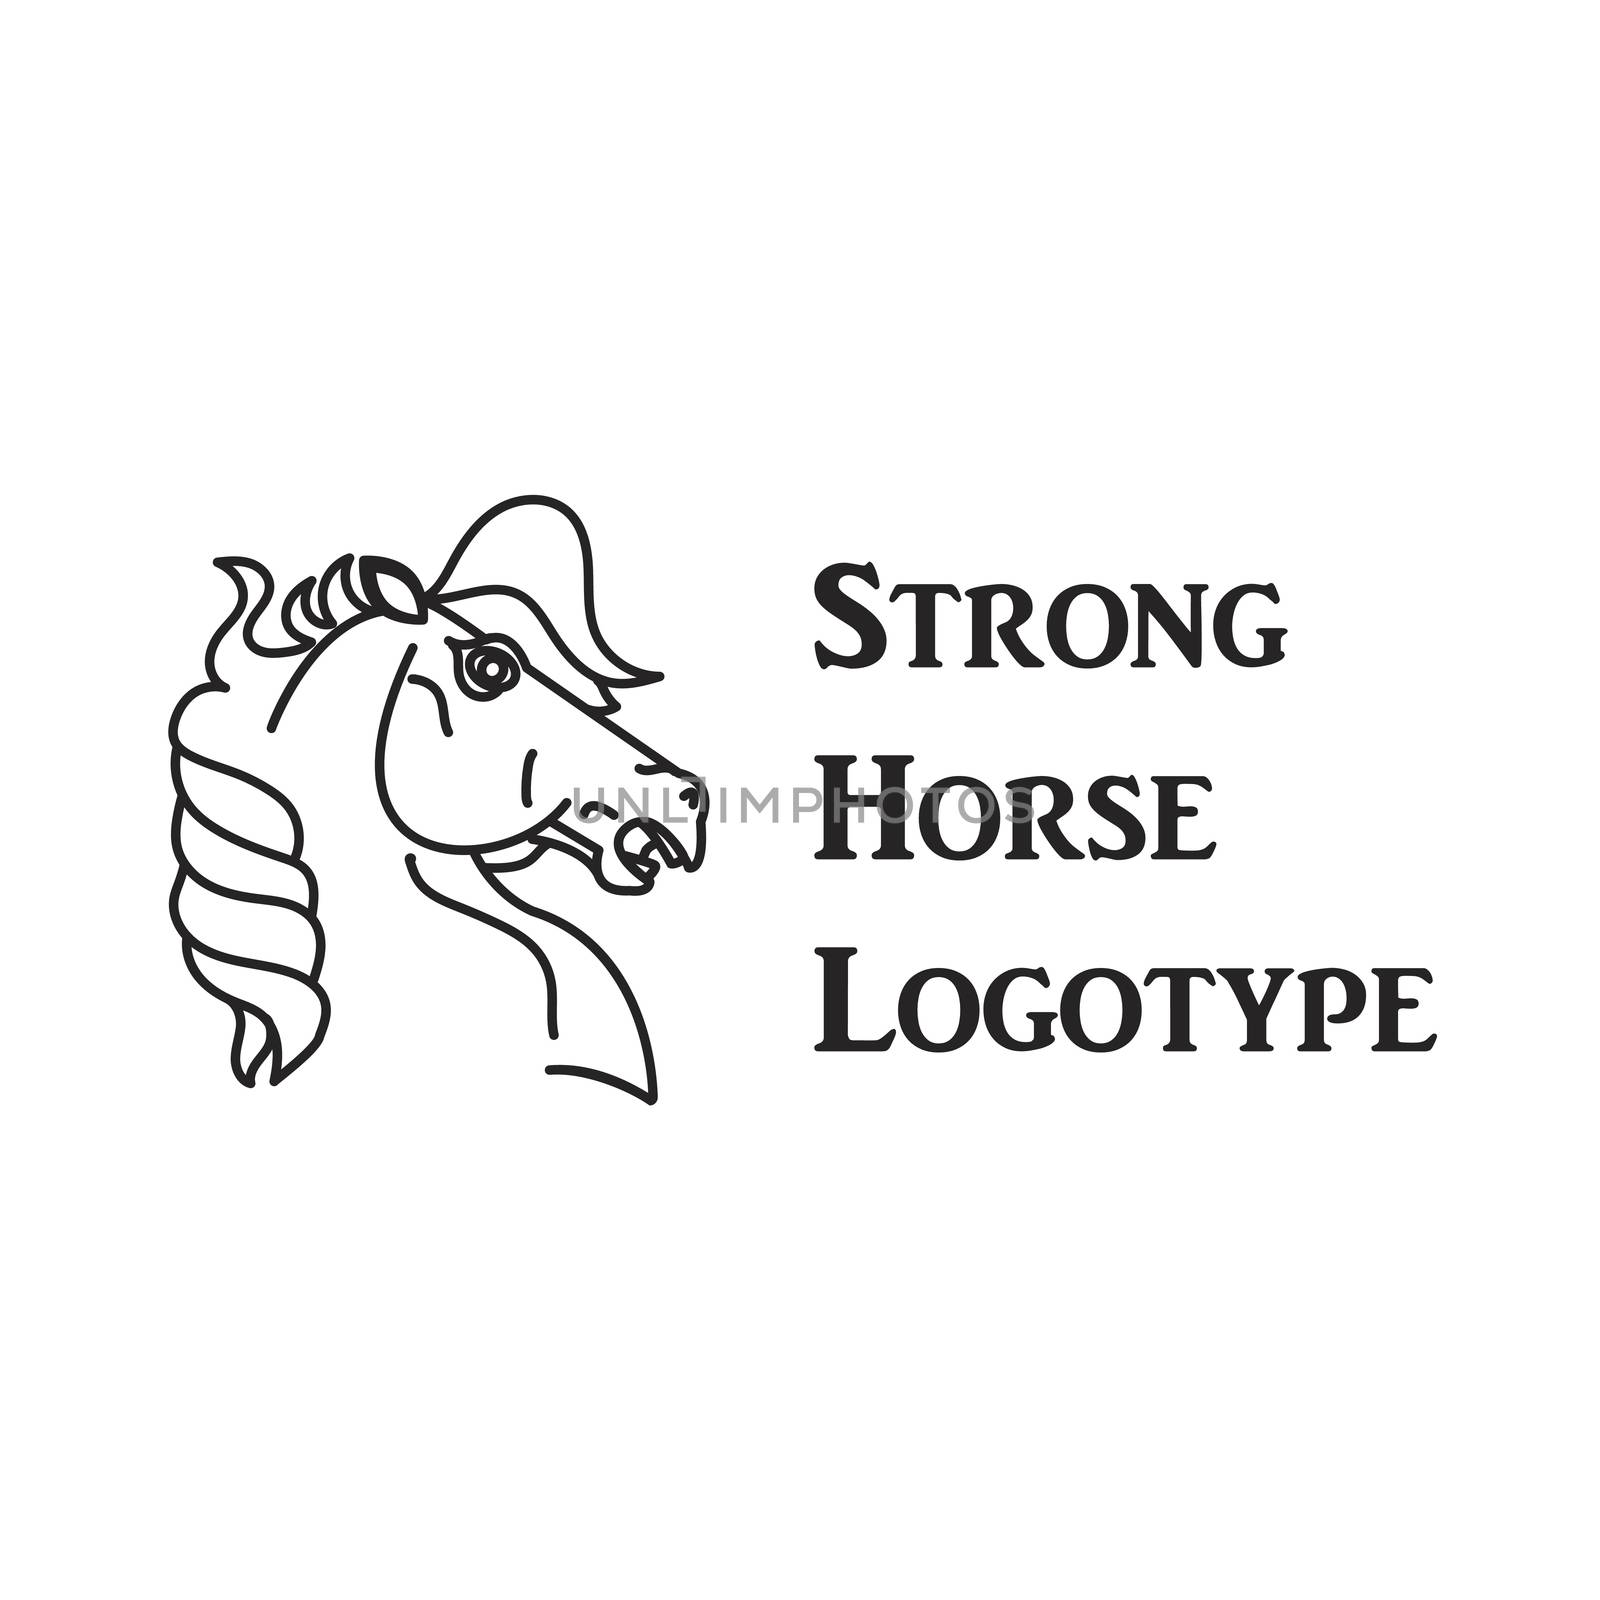 Horse symbol and logo, great power sign